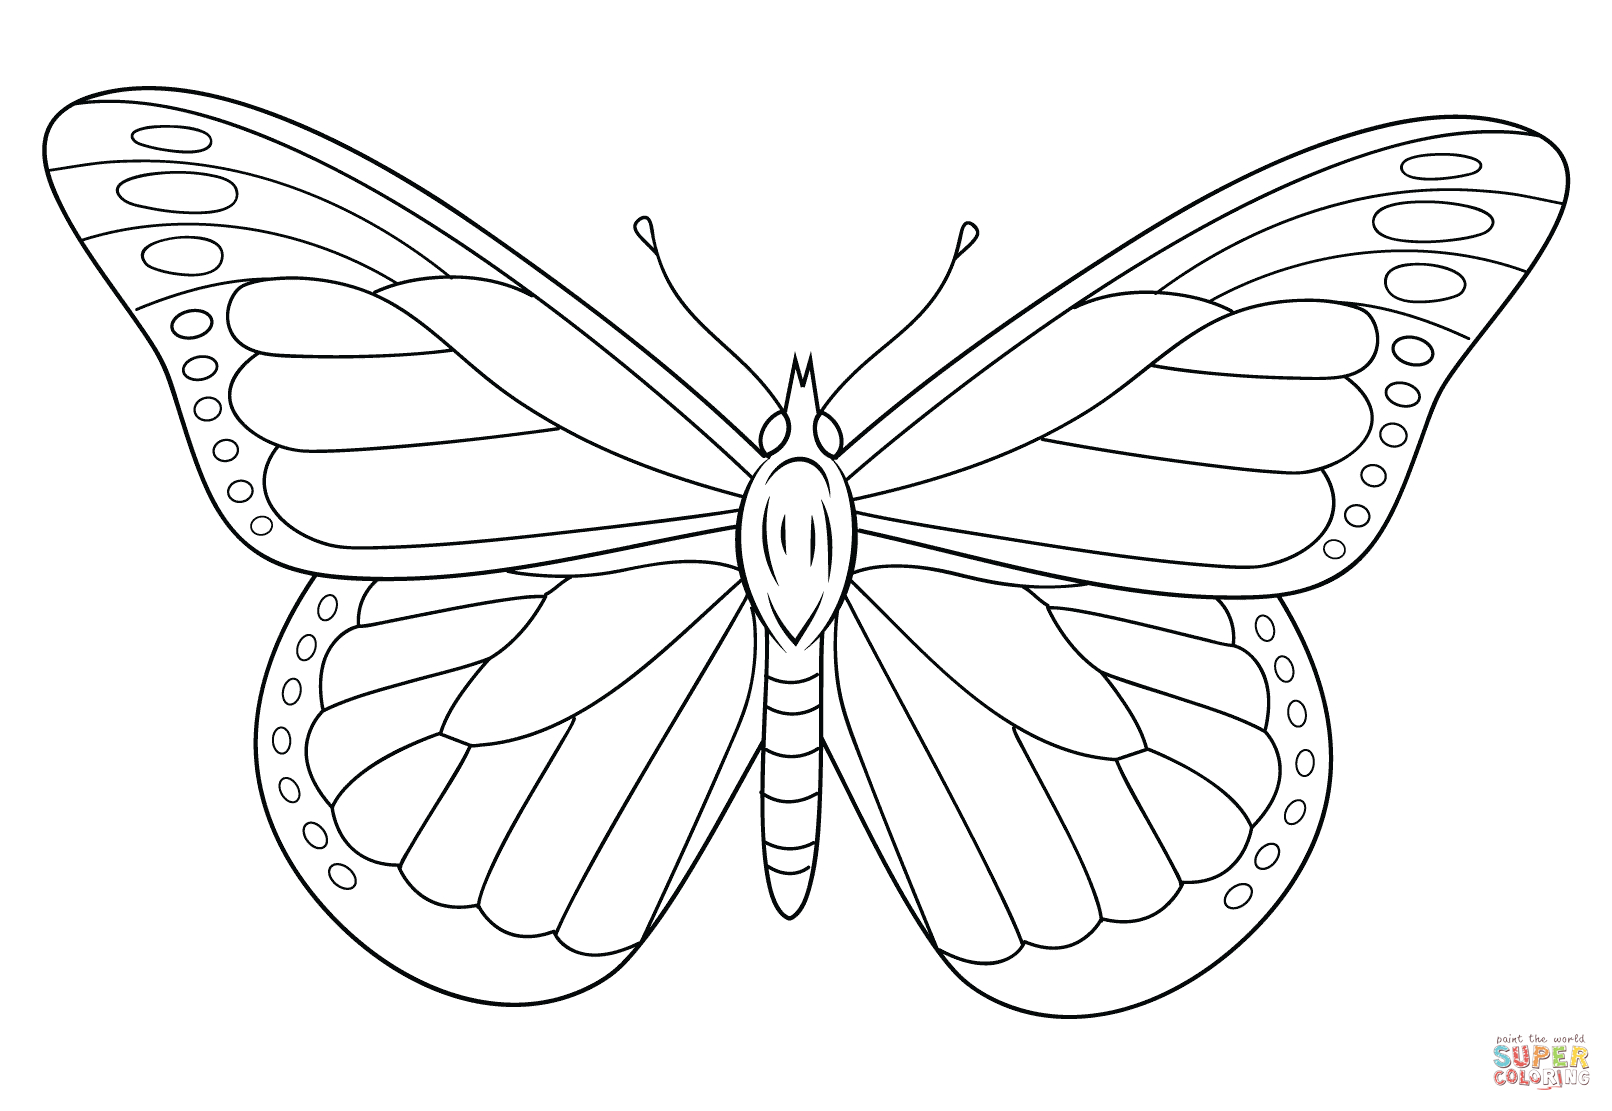 Monarch Butterfly Coloring Page | Free Printable Coloring Pages - Free Printable Butterfly Coloring Pages